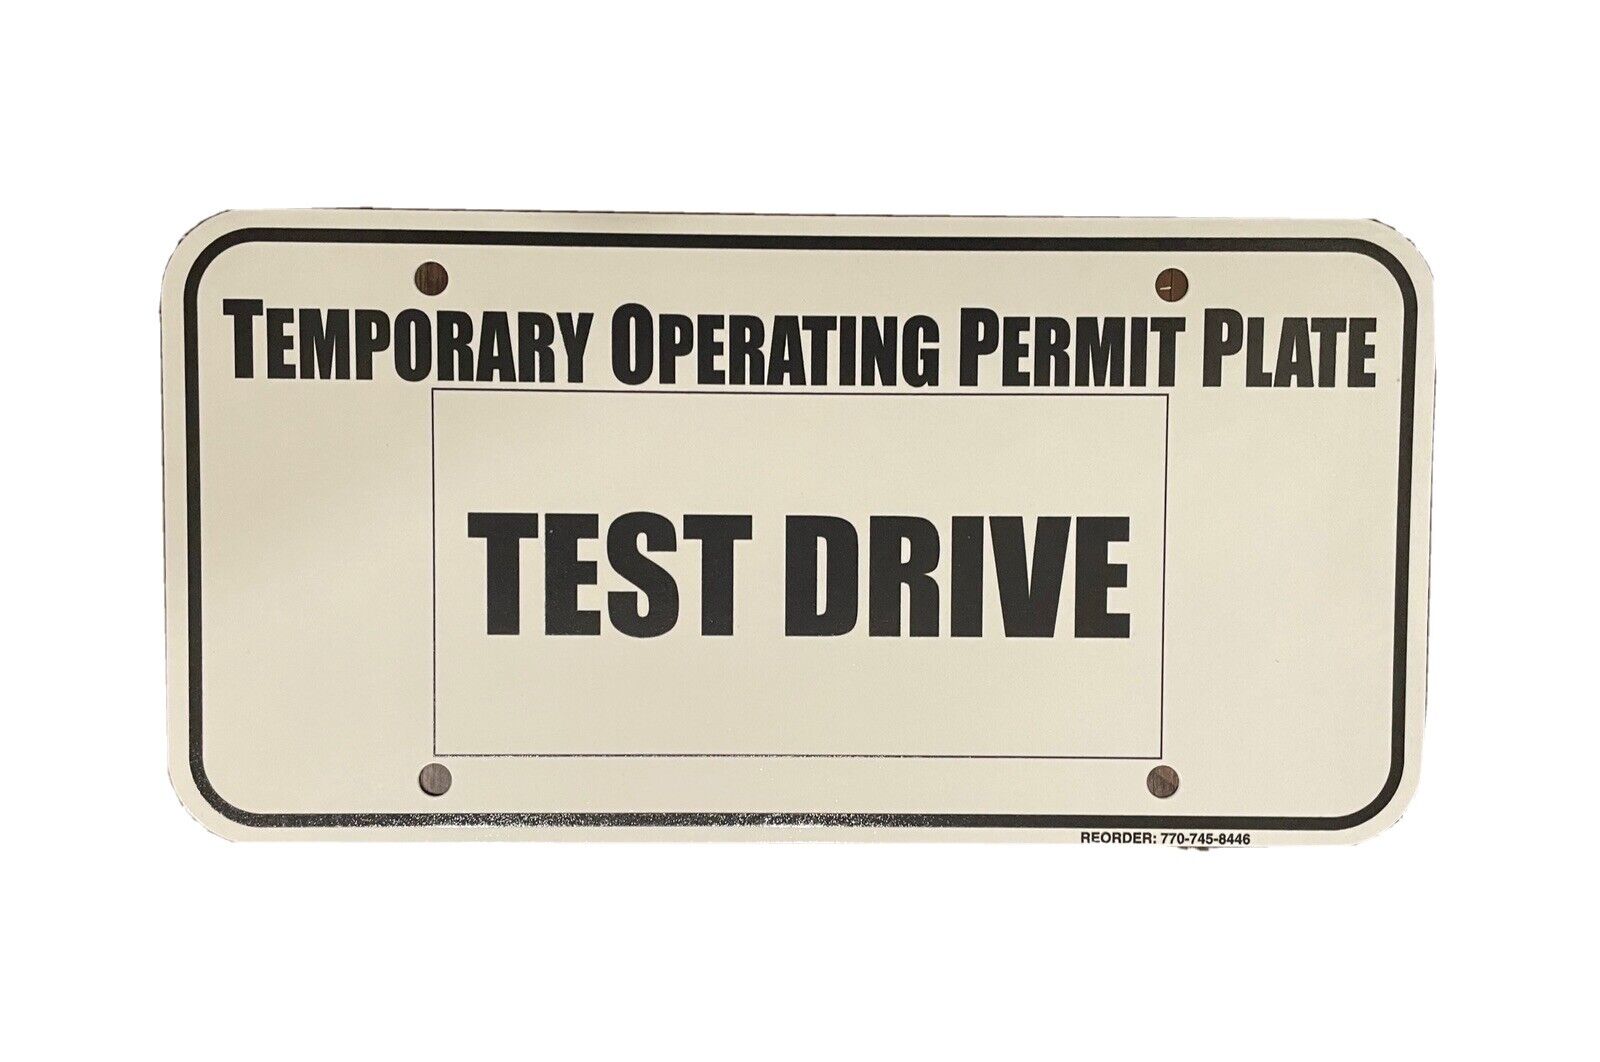 One New Dealer License Plate Temporary Test Drive Tags White Black Temp